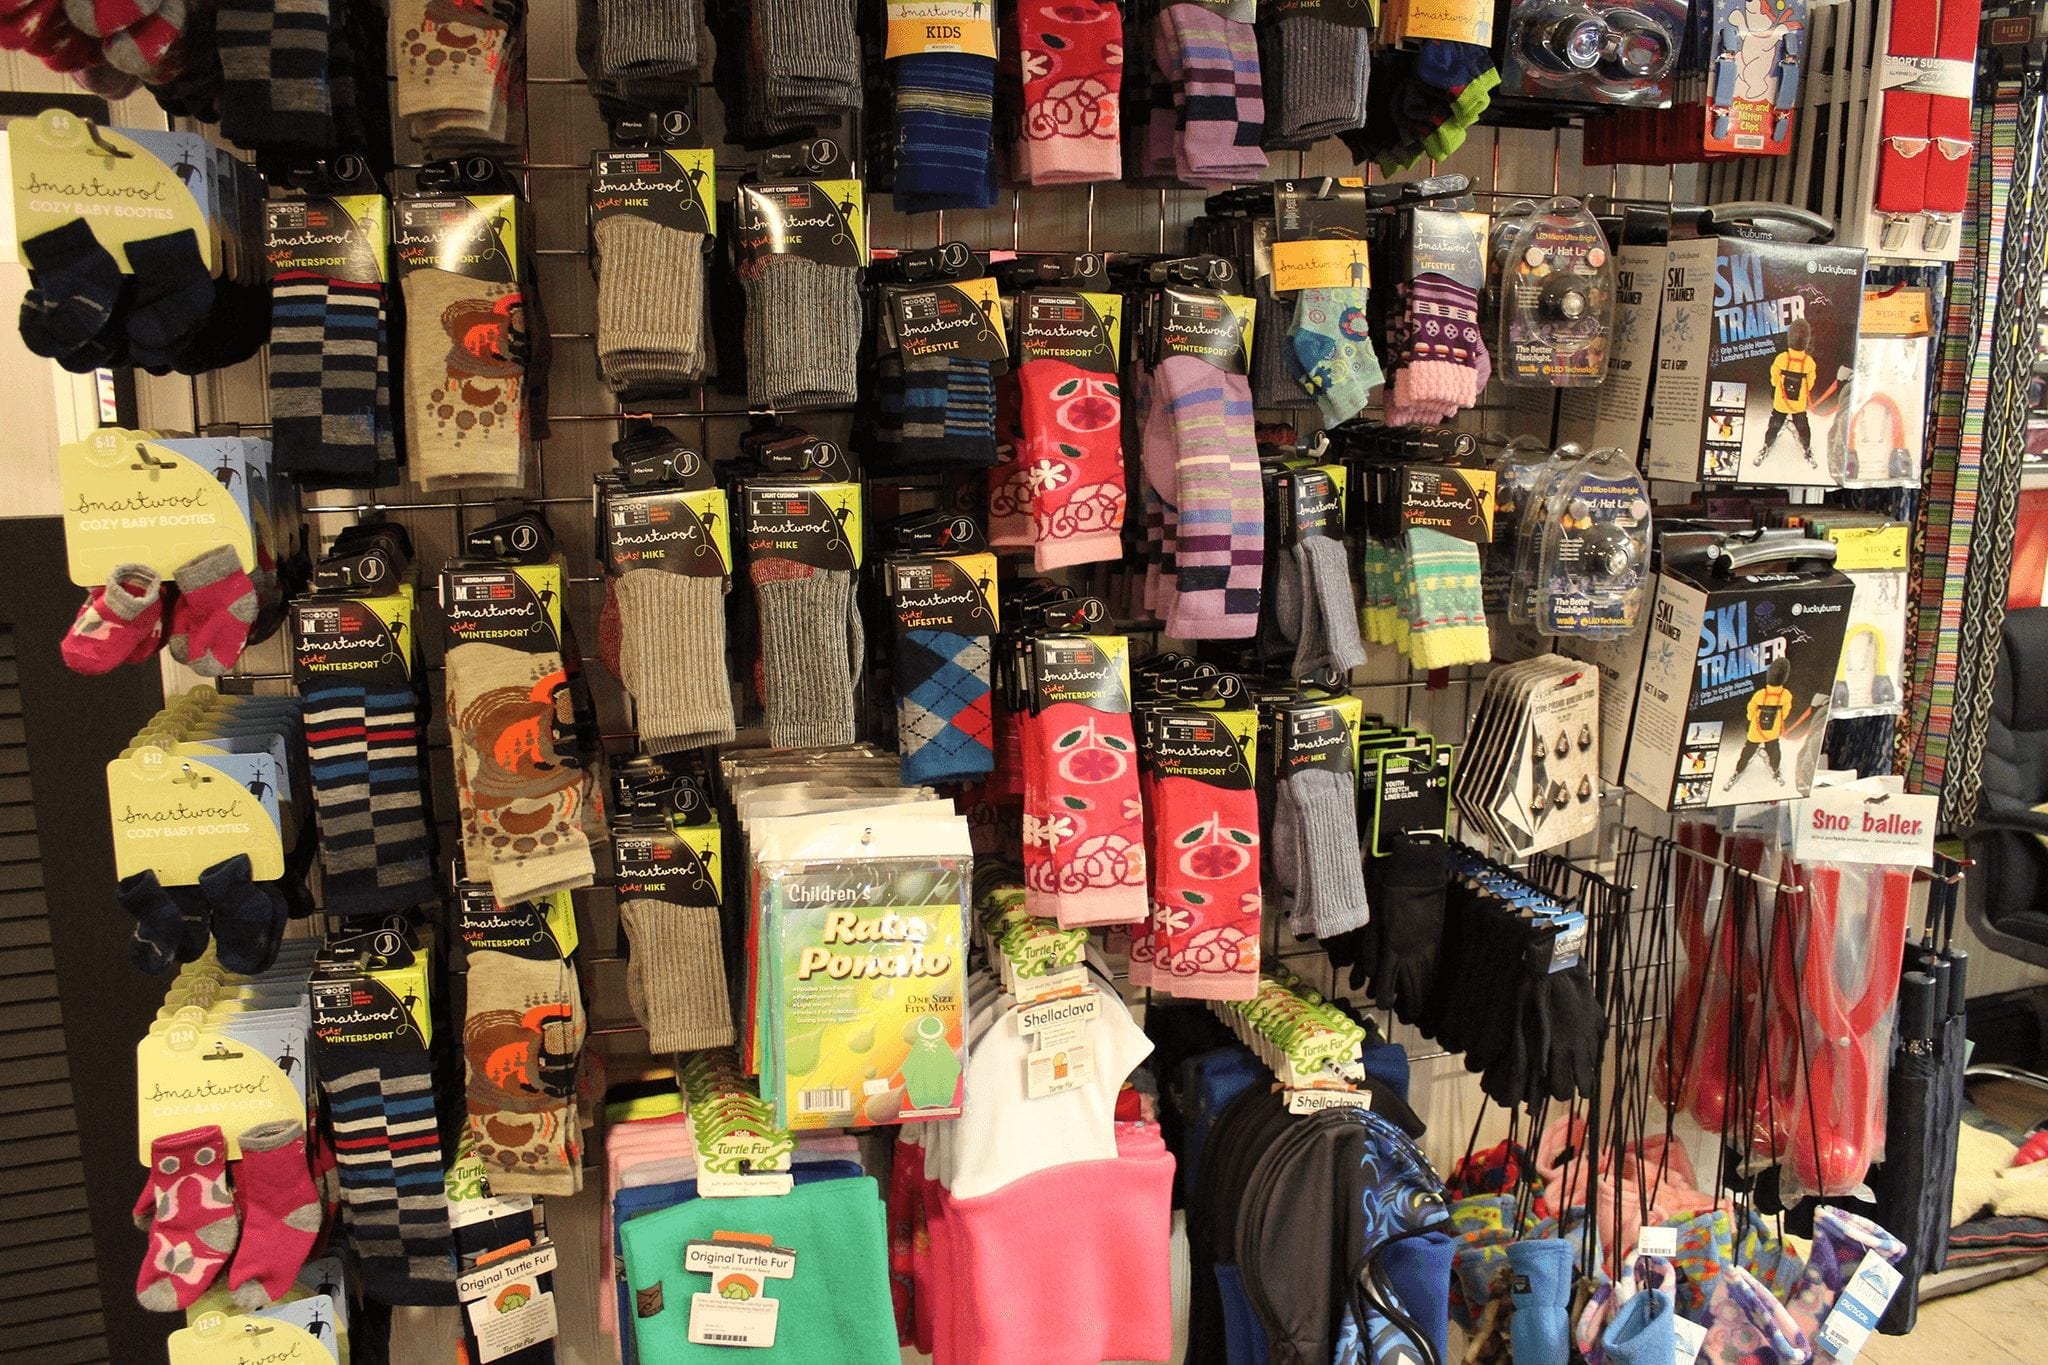 A rack of kid's socks at a winter retail location in downtown Breckenridge. One of the best tips for a trip to Breckenridge is to buy warm socks.